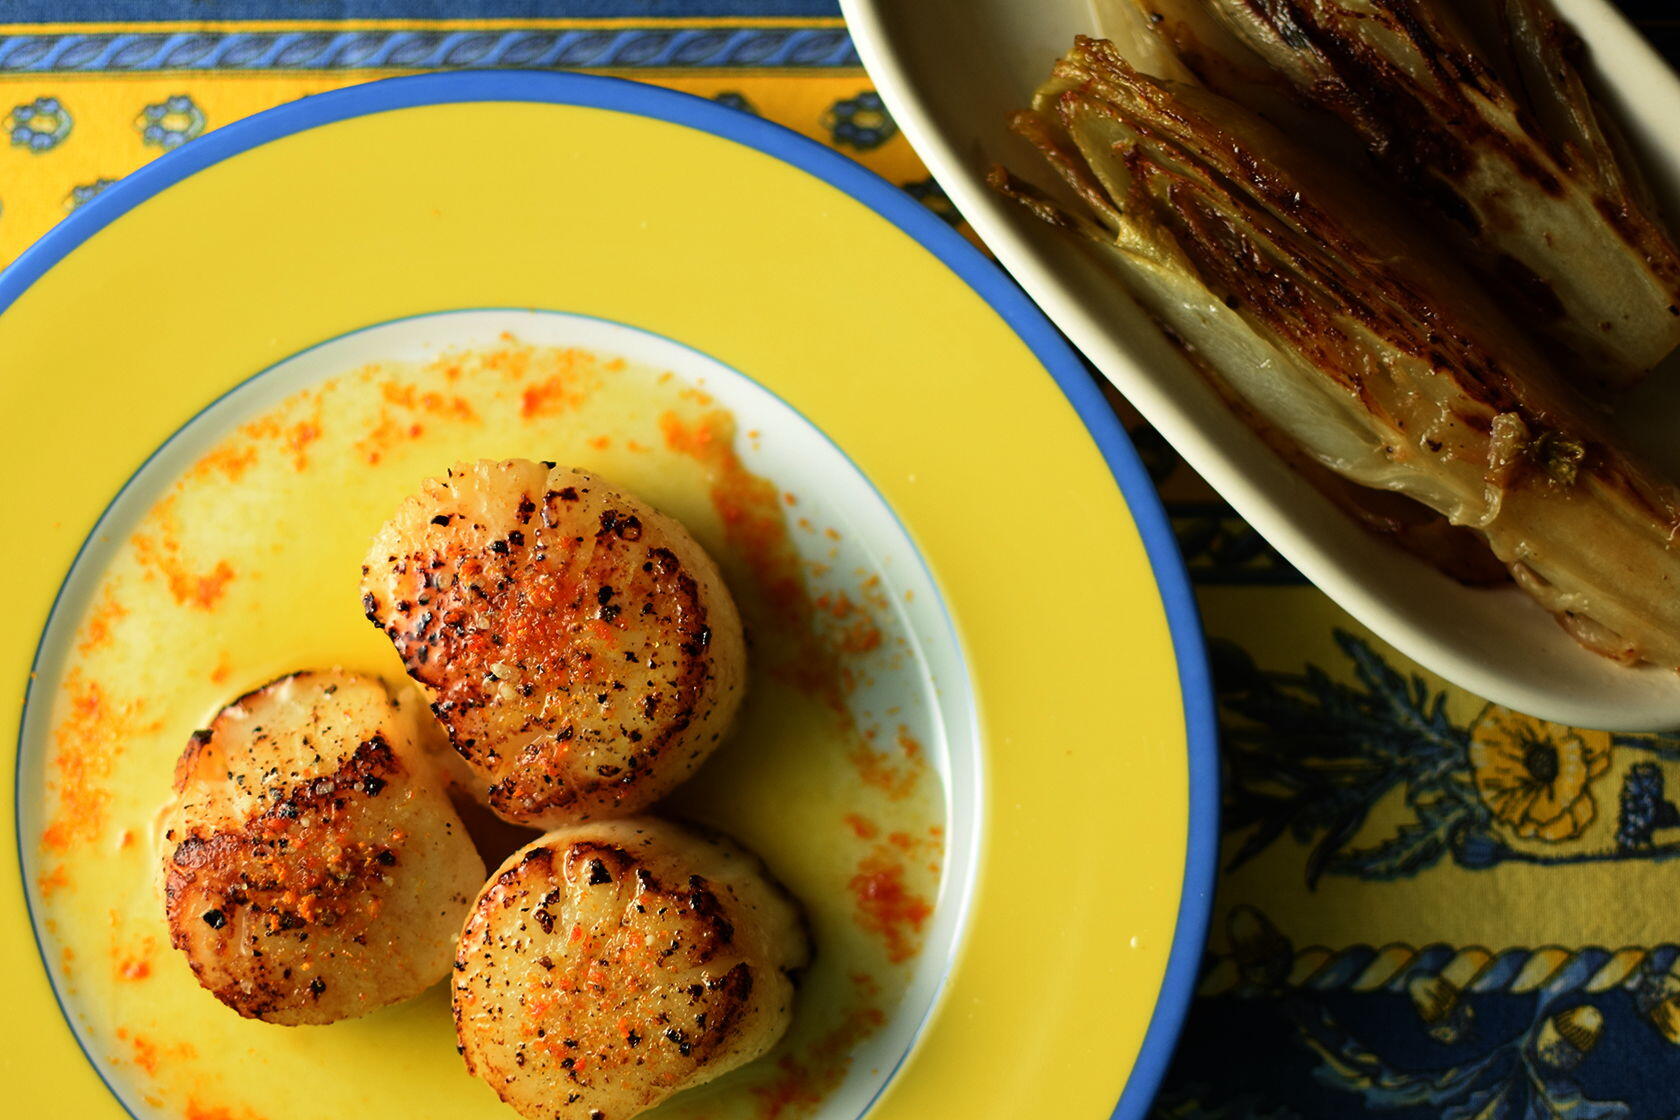 Seared Scallops Coquilles Saint-Jacques